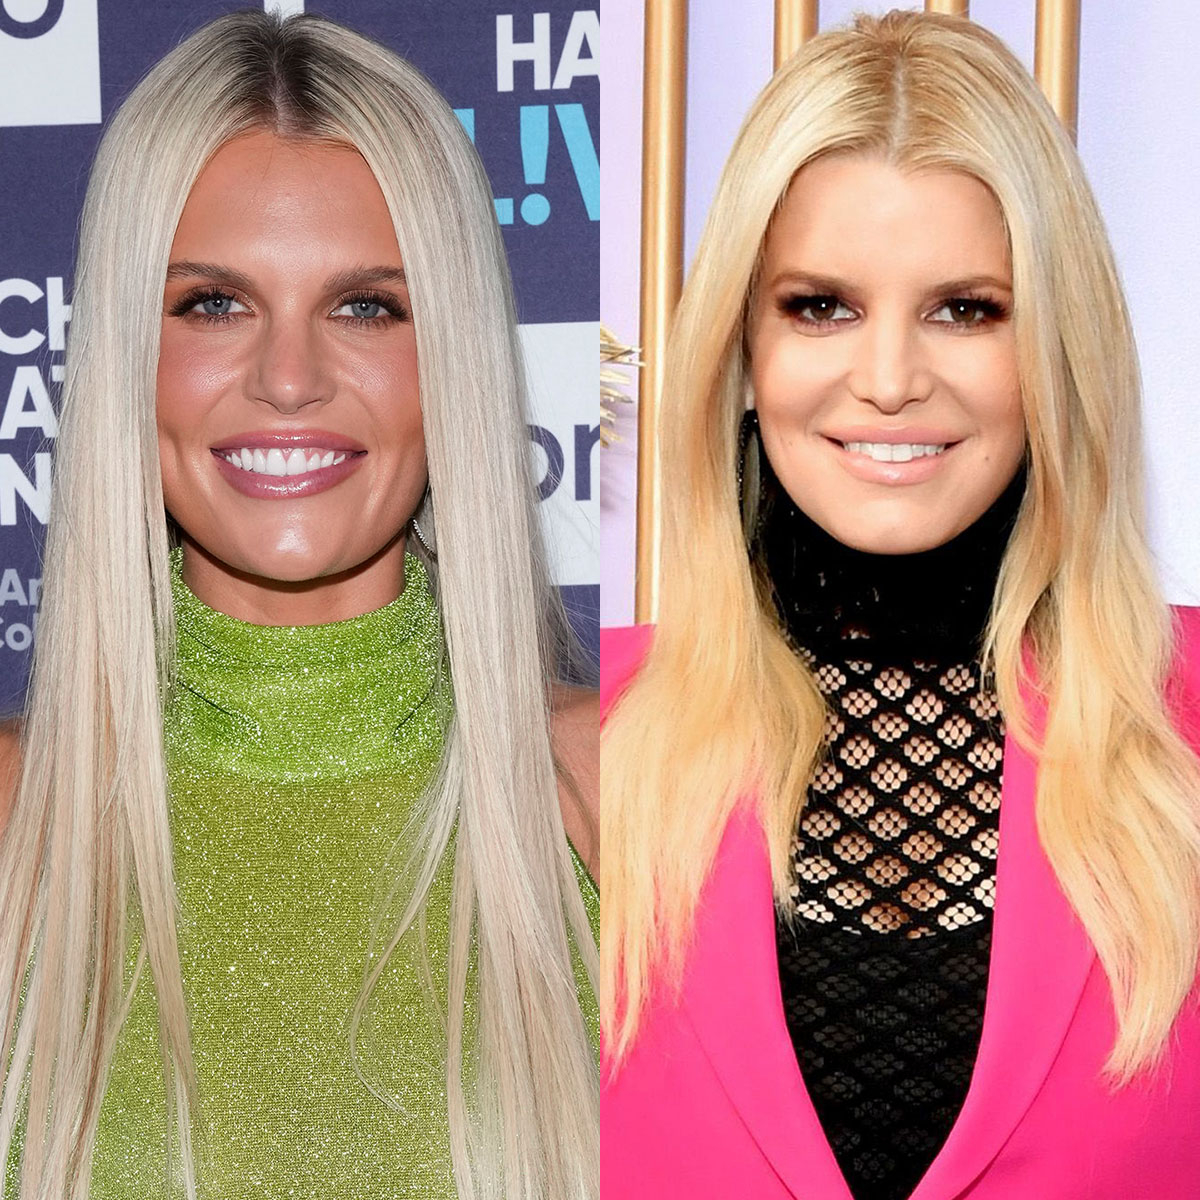 Jessica Simpson Reacts to Madison LeCroy’s Newlyweds Costume